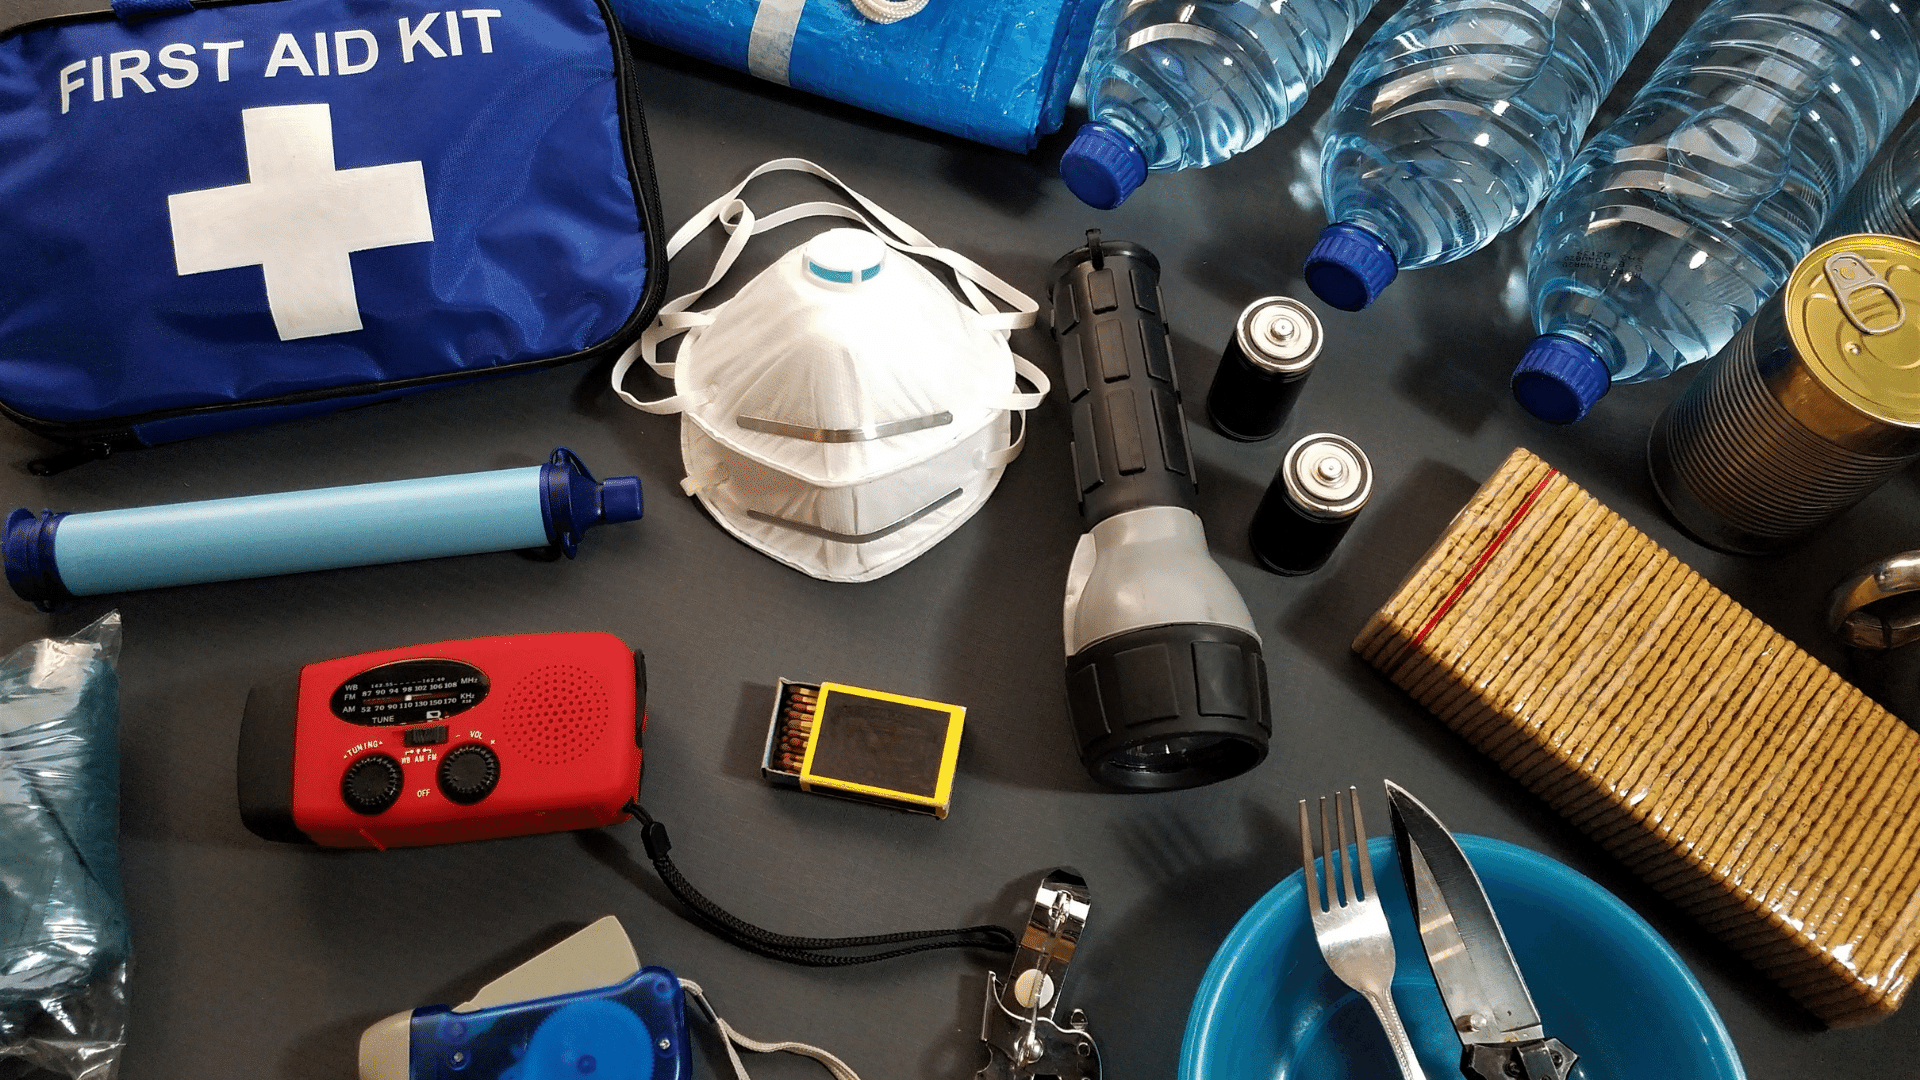 First Aid Kit and items